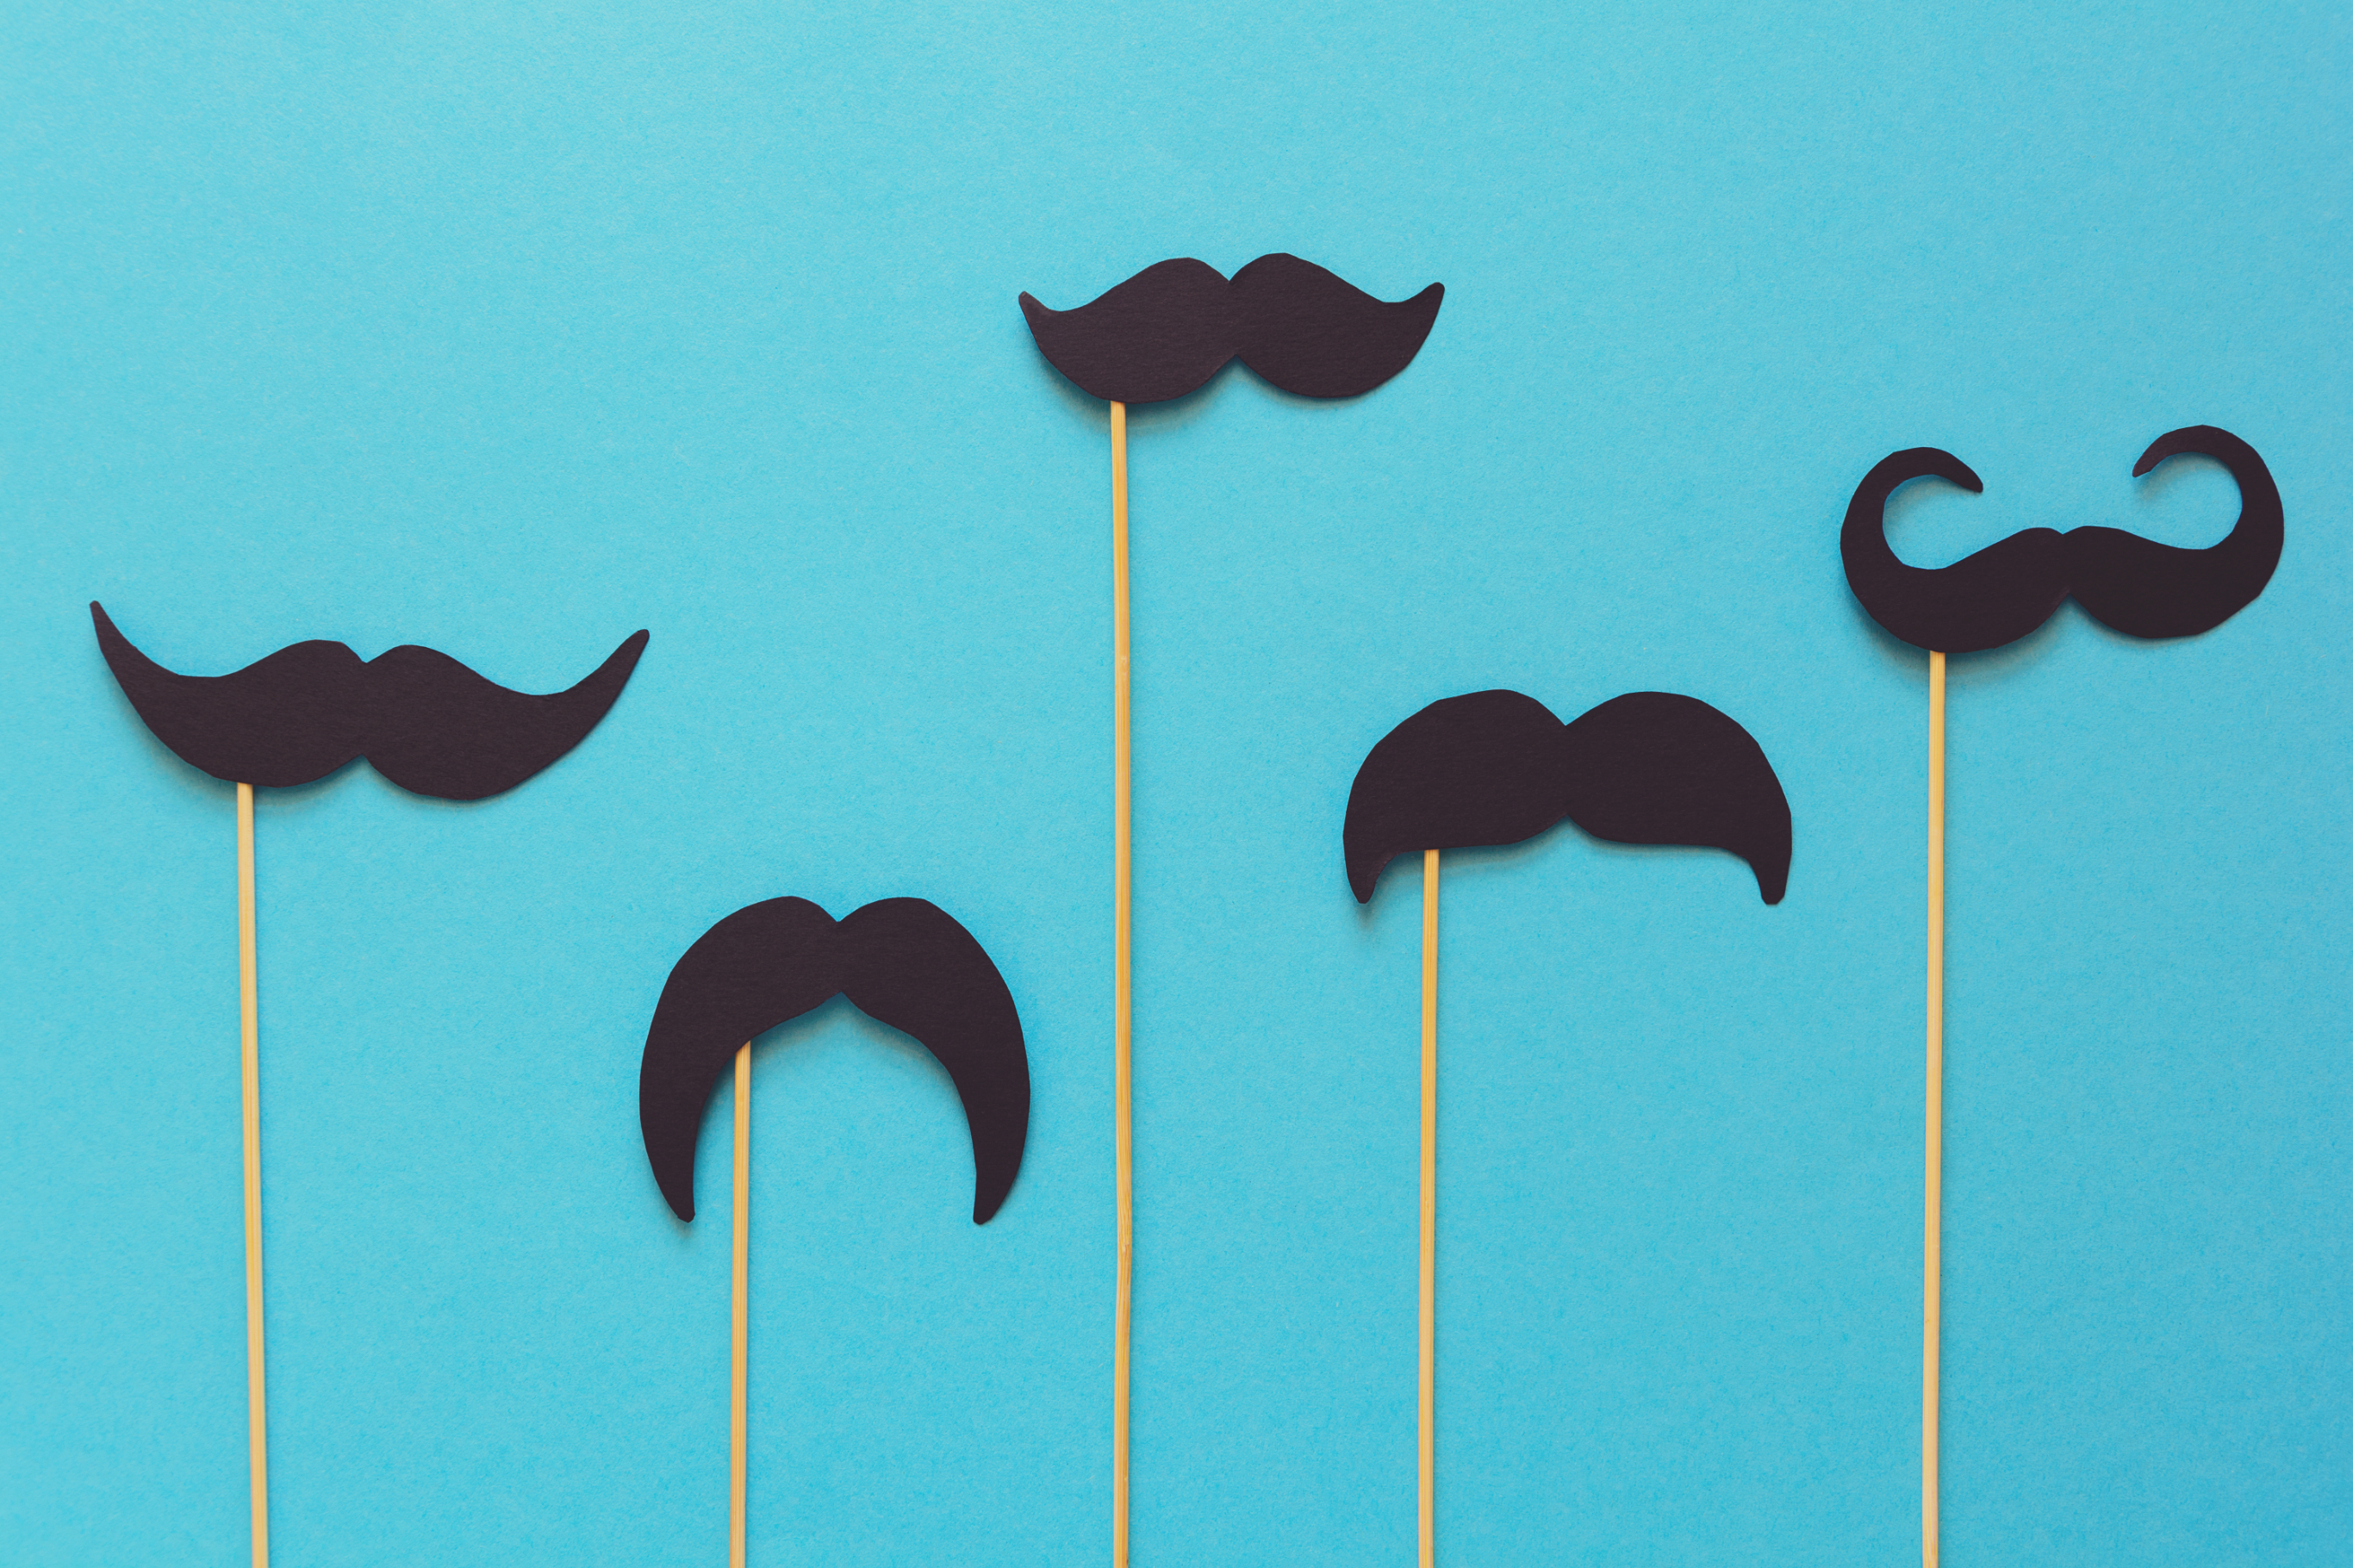 Image of five black paper mustaches on sticks, arranged against a plain background